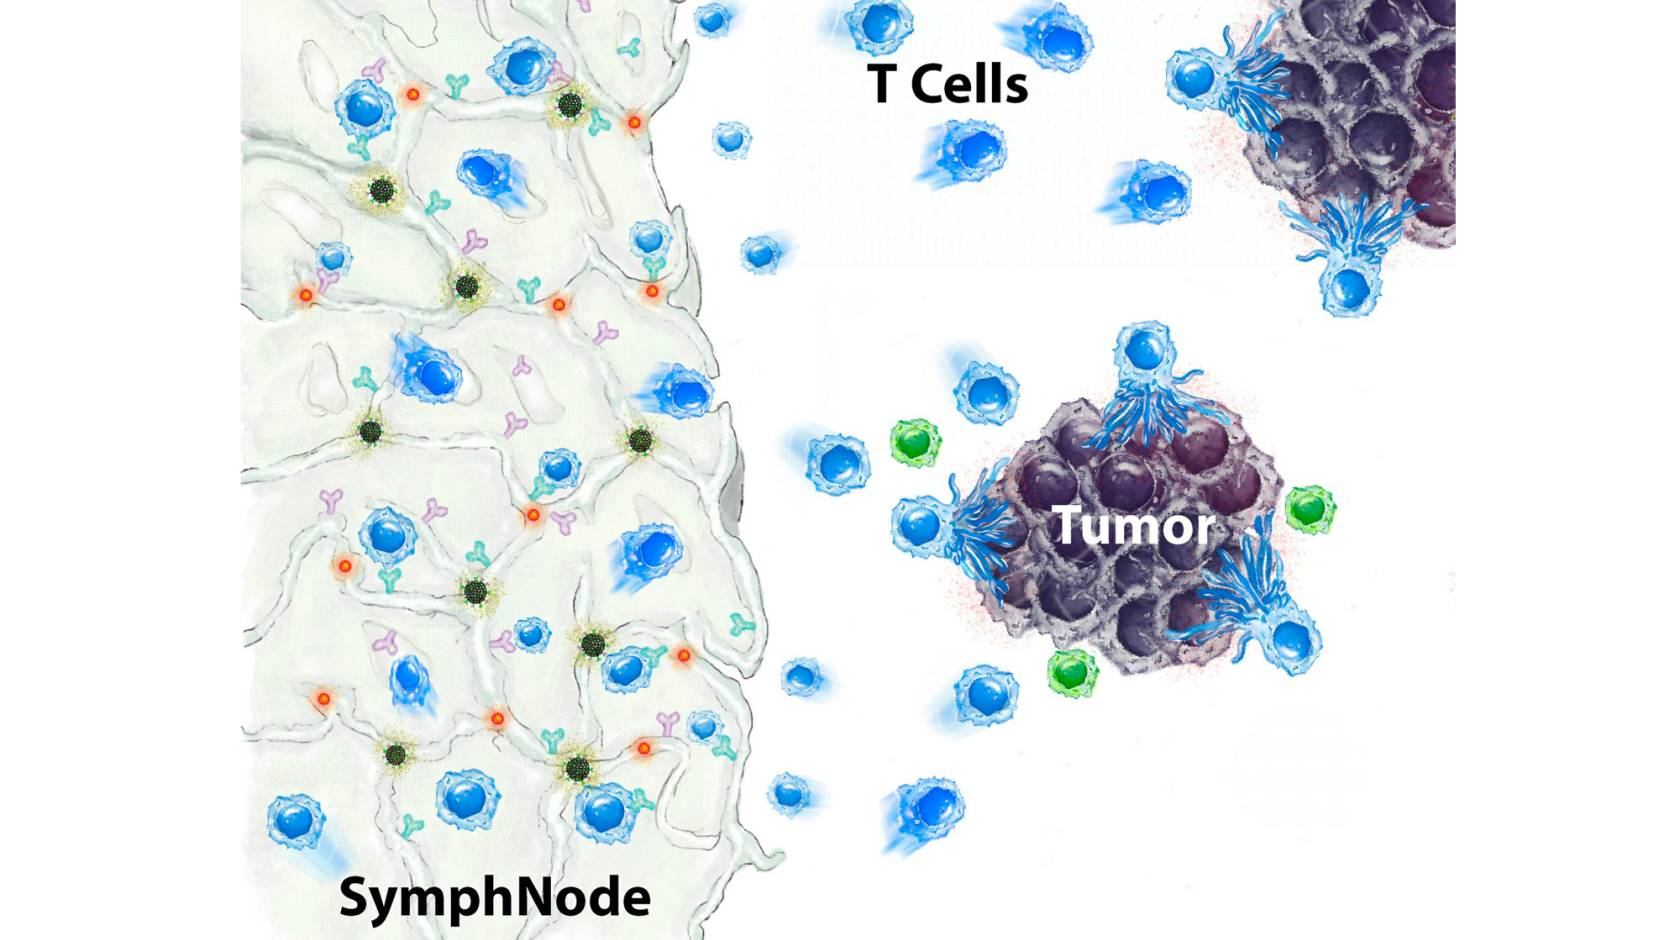 Illustration of a SymphNode interacting with T cells and a tumor